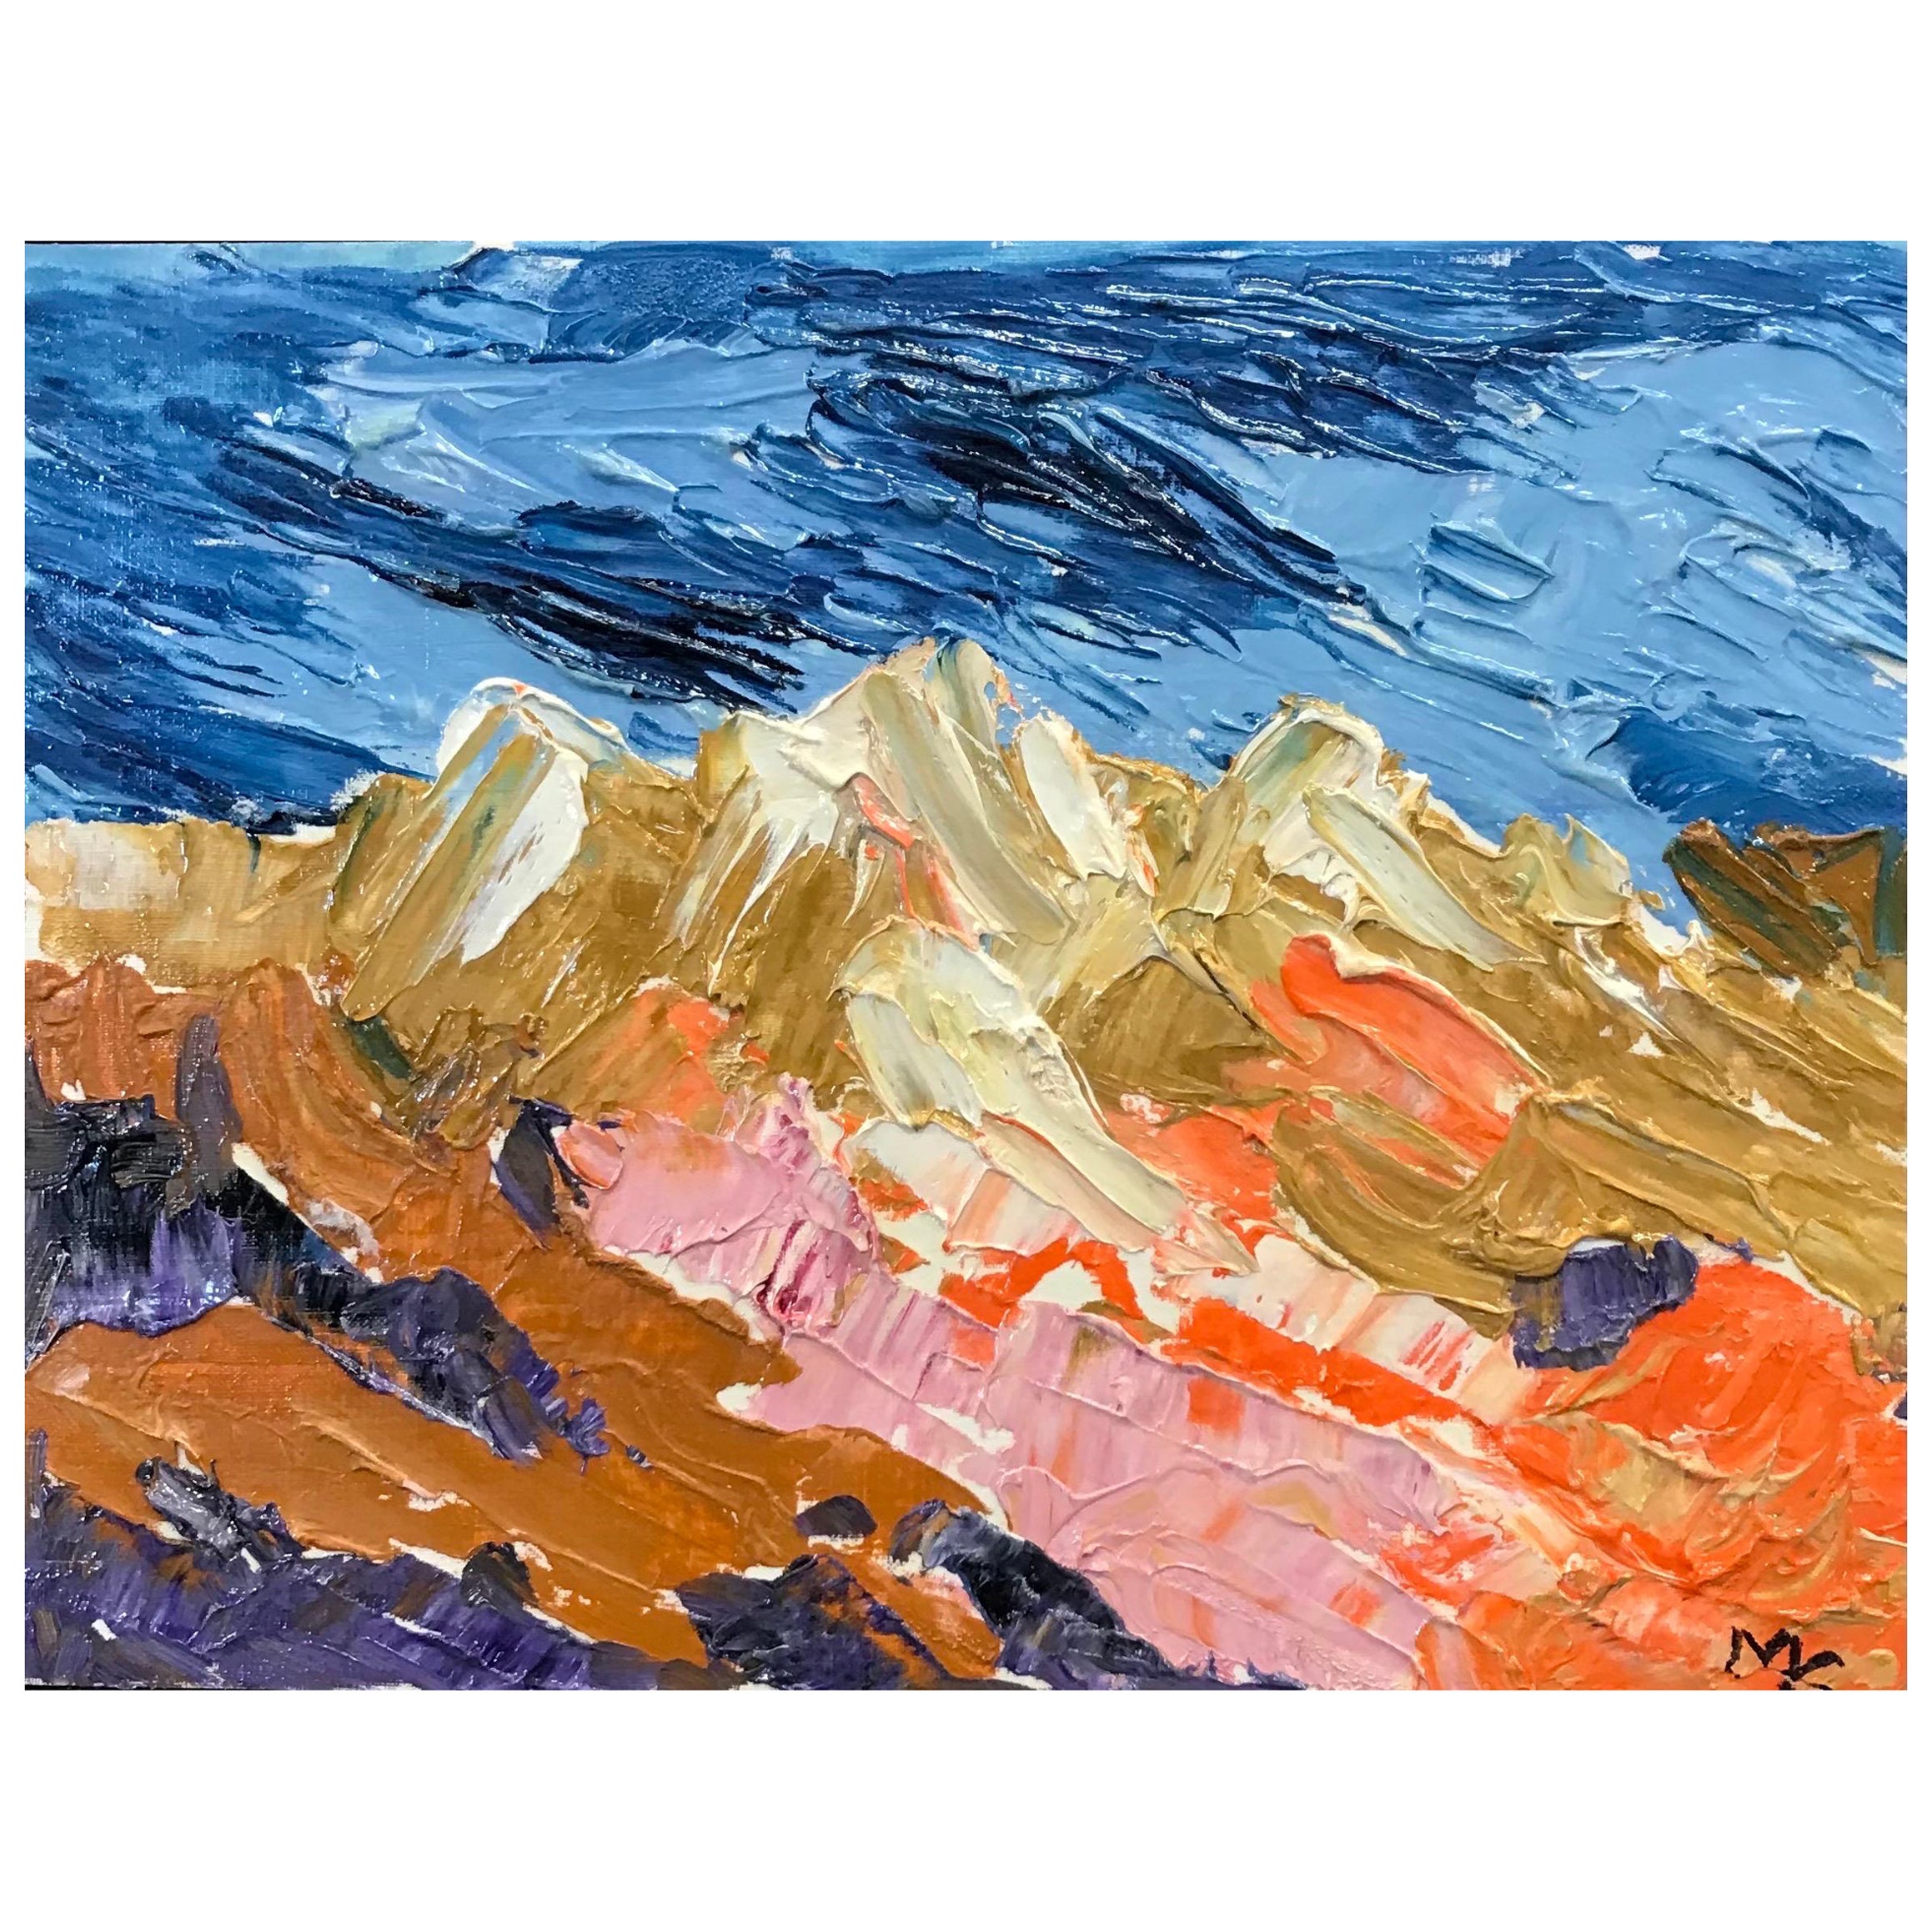 Bright & Colorful French Impressionist Oil Painting - Blue Sky Over Mountains For Sale